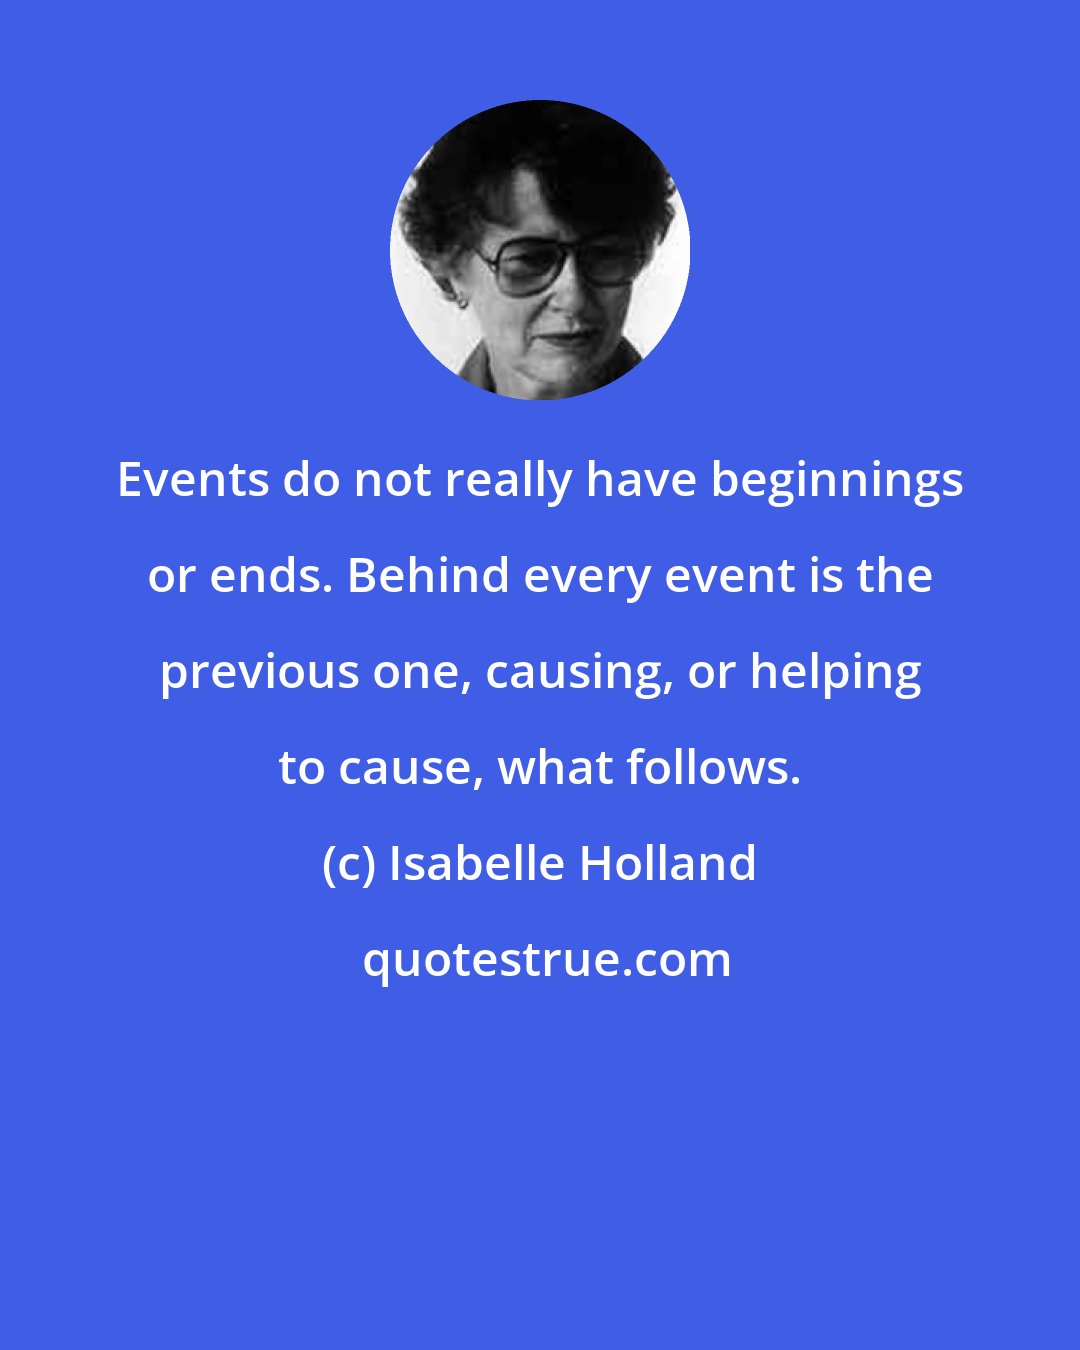 Isabelle Holland: Events do not really have beginnings or ends. Behind every event is the previous one, causing, or helping to cause, what follows.